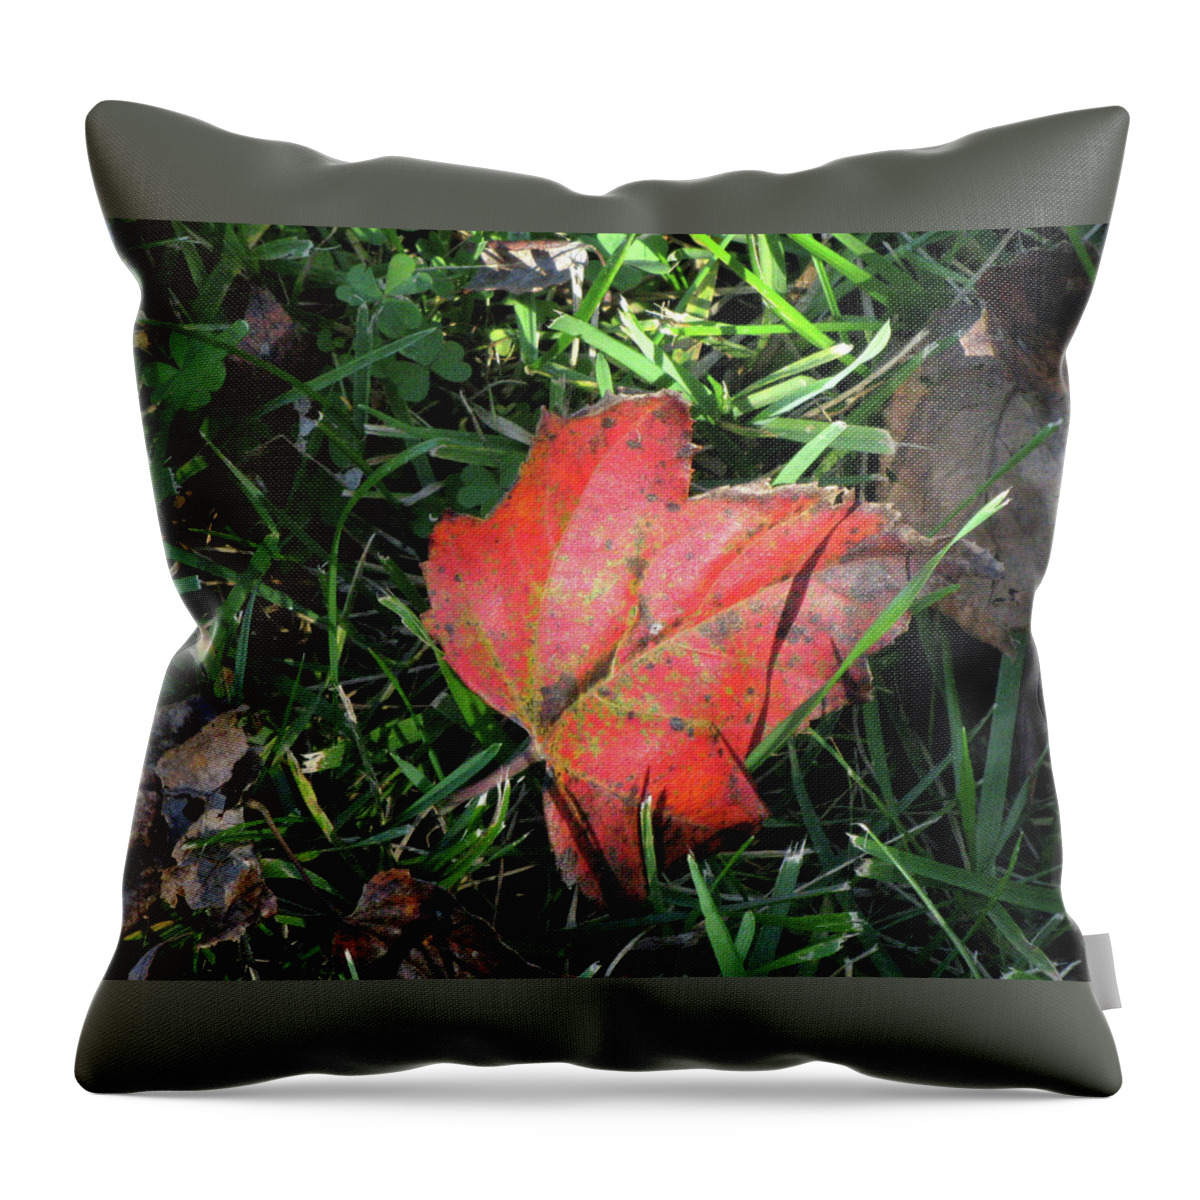 Leaf Throw Pillow featuring the photograph Red Leaf Against Green Grass by Michele Wilson